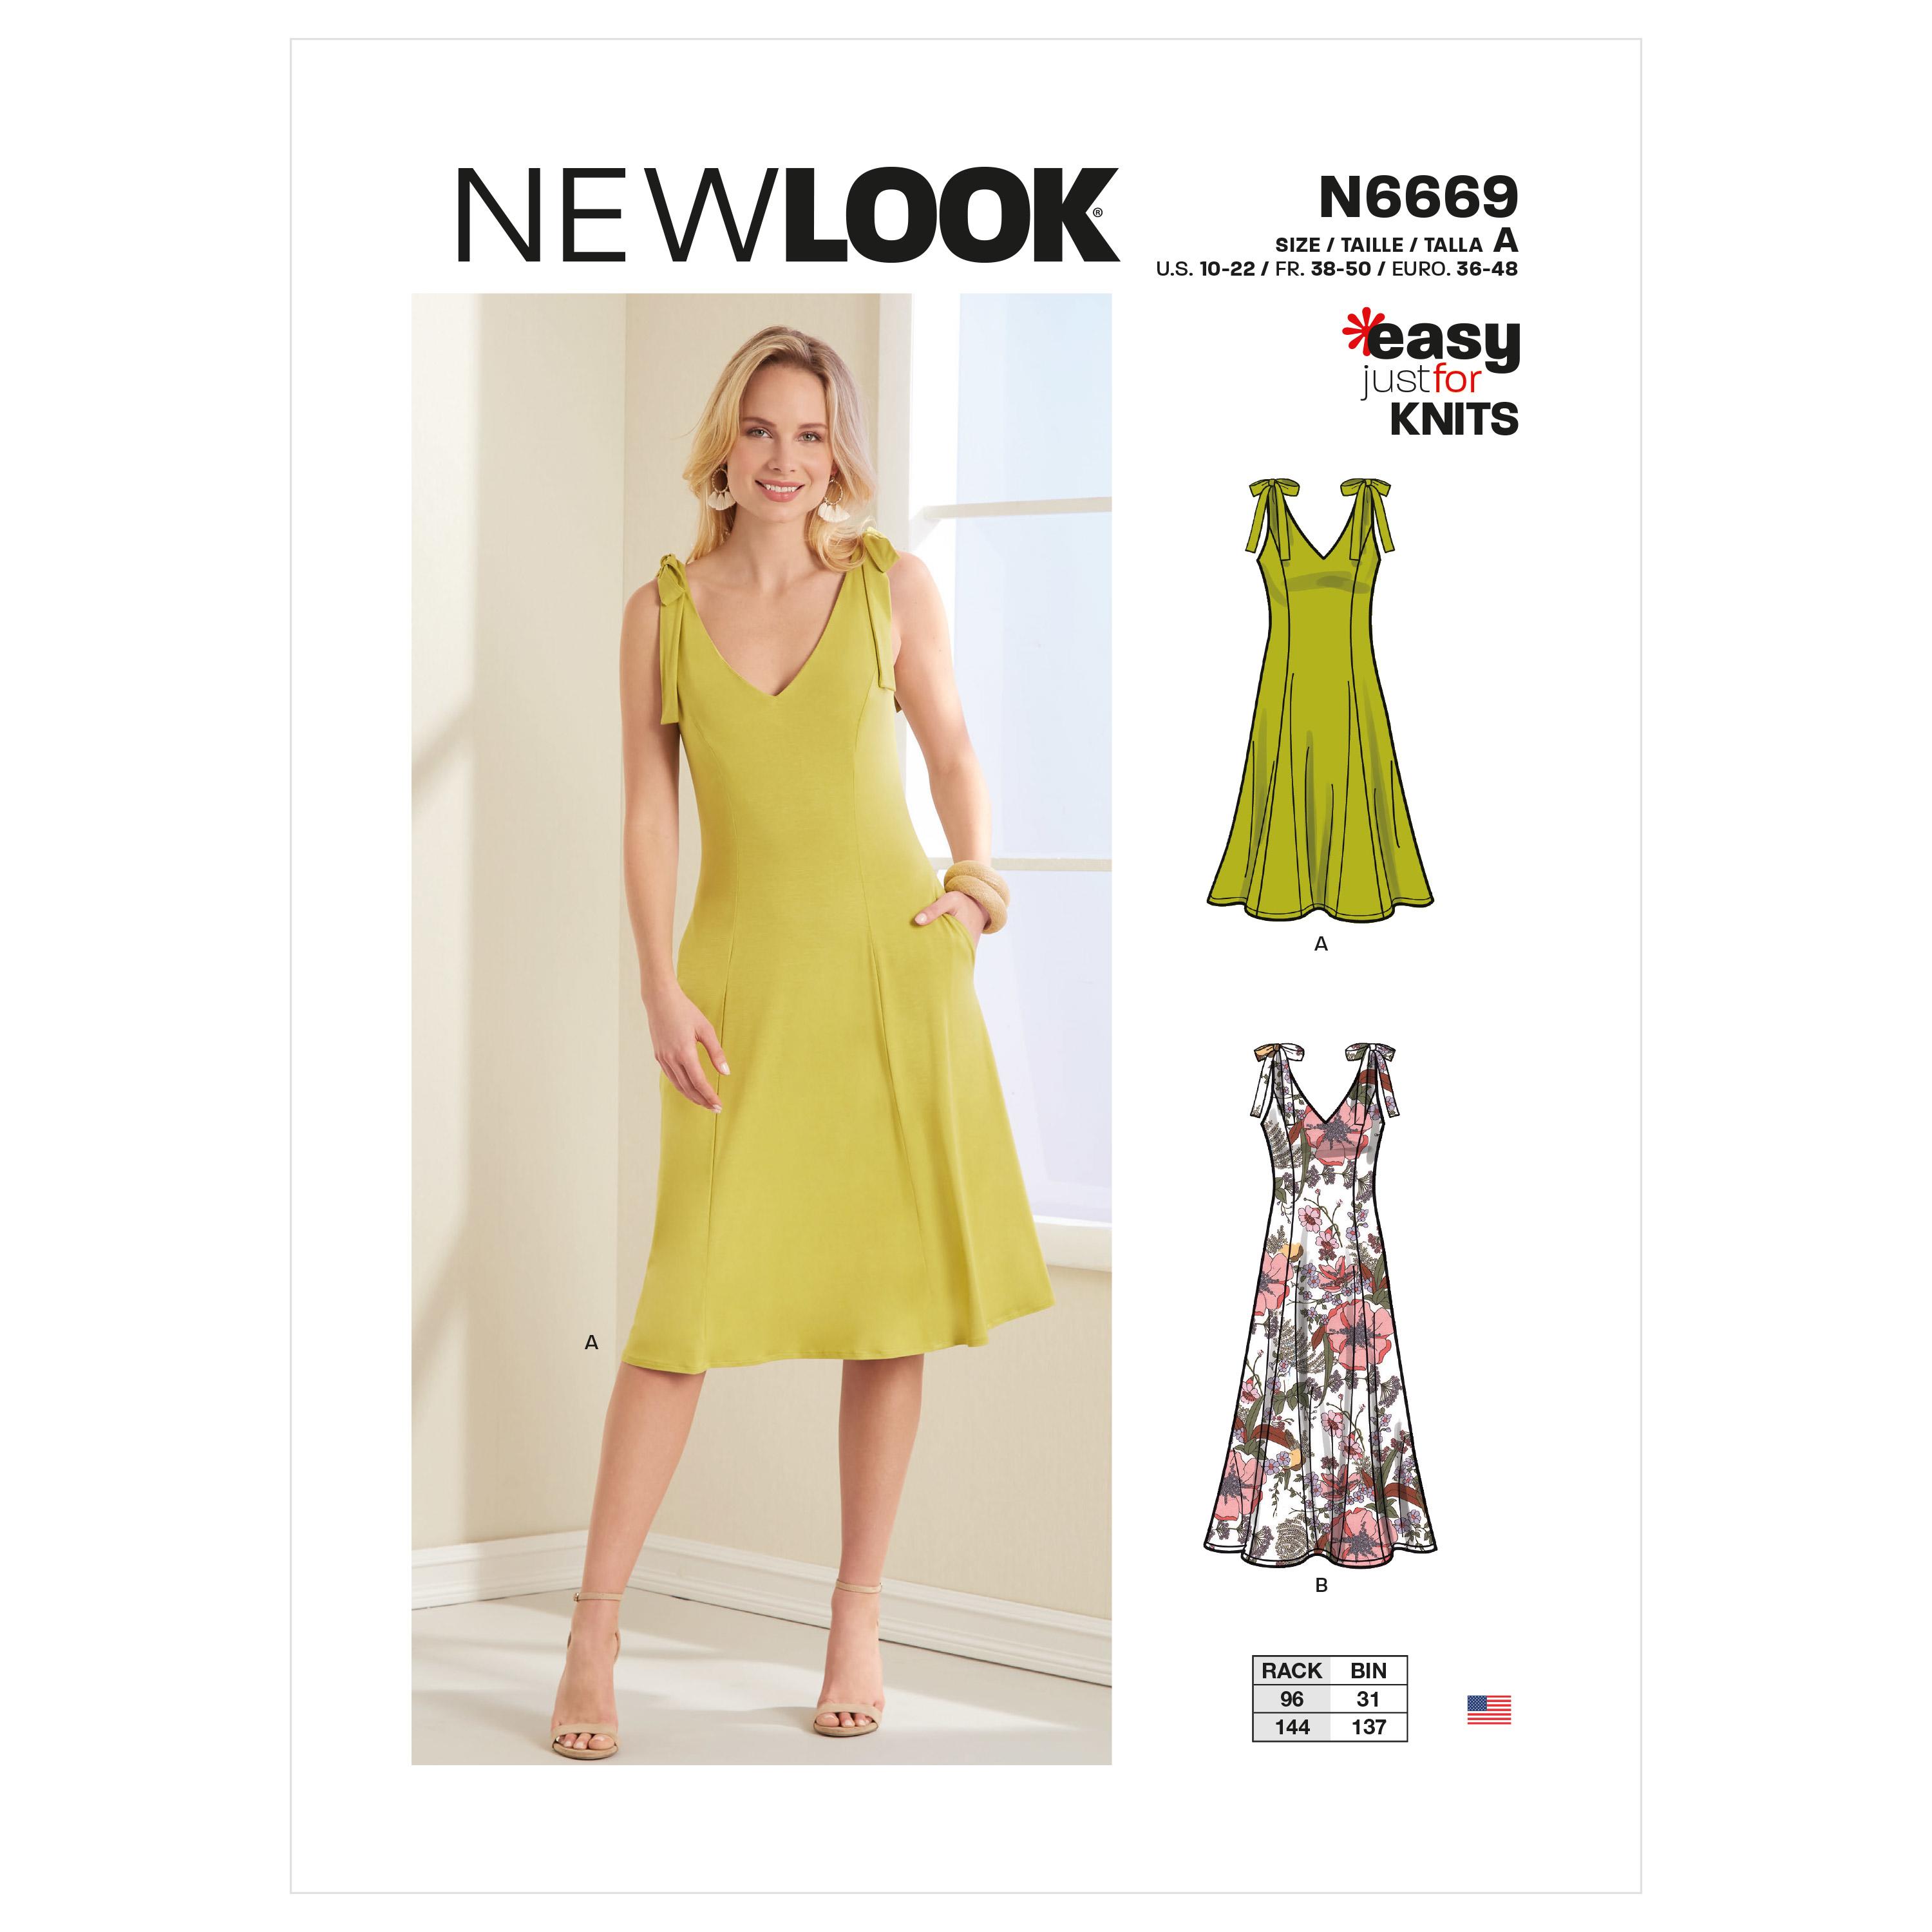 New Look Sewing Pattern N6669 Misses' Dress, designed for stretch knits